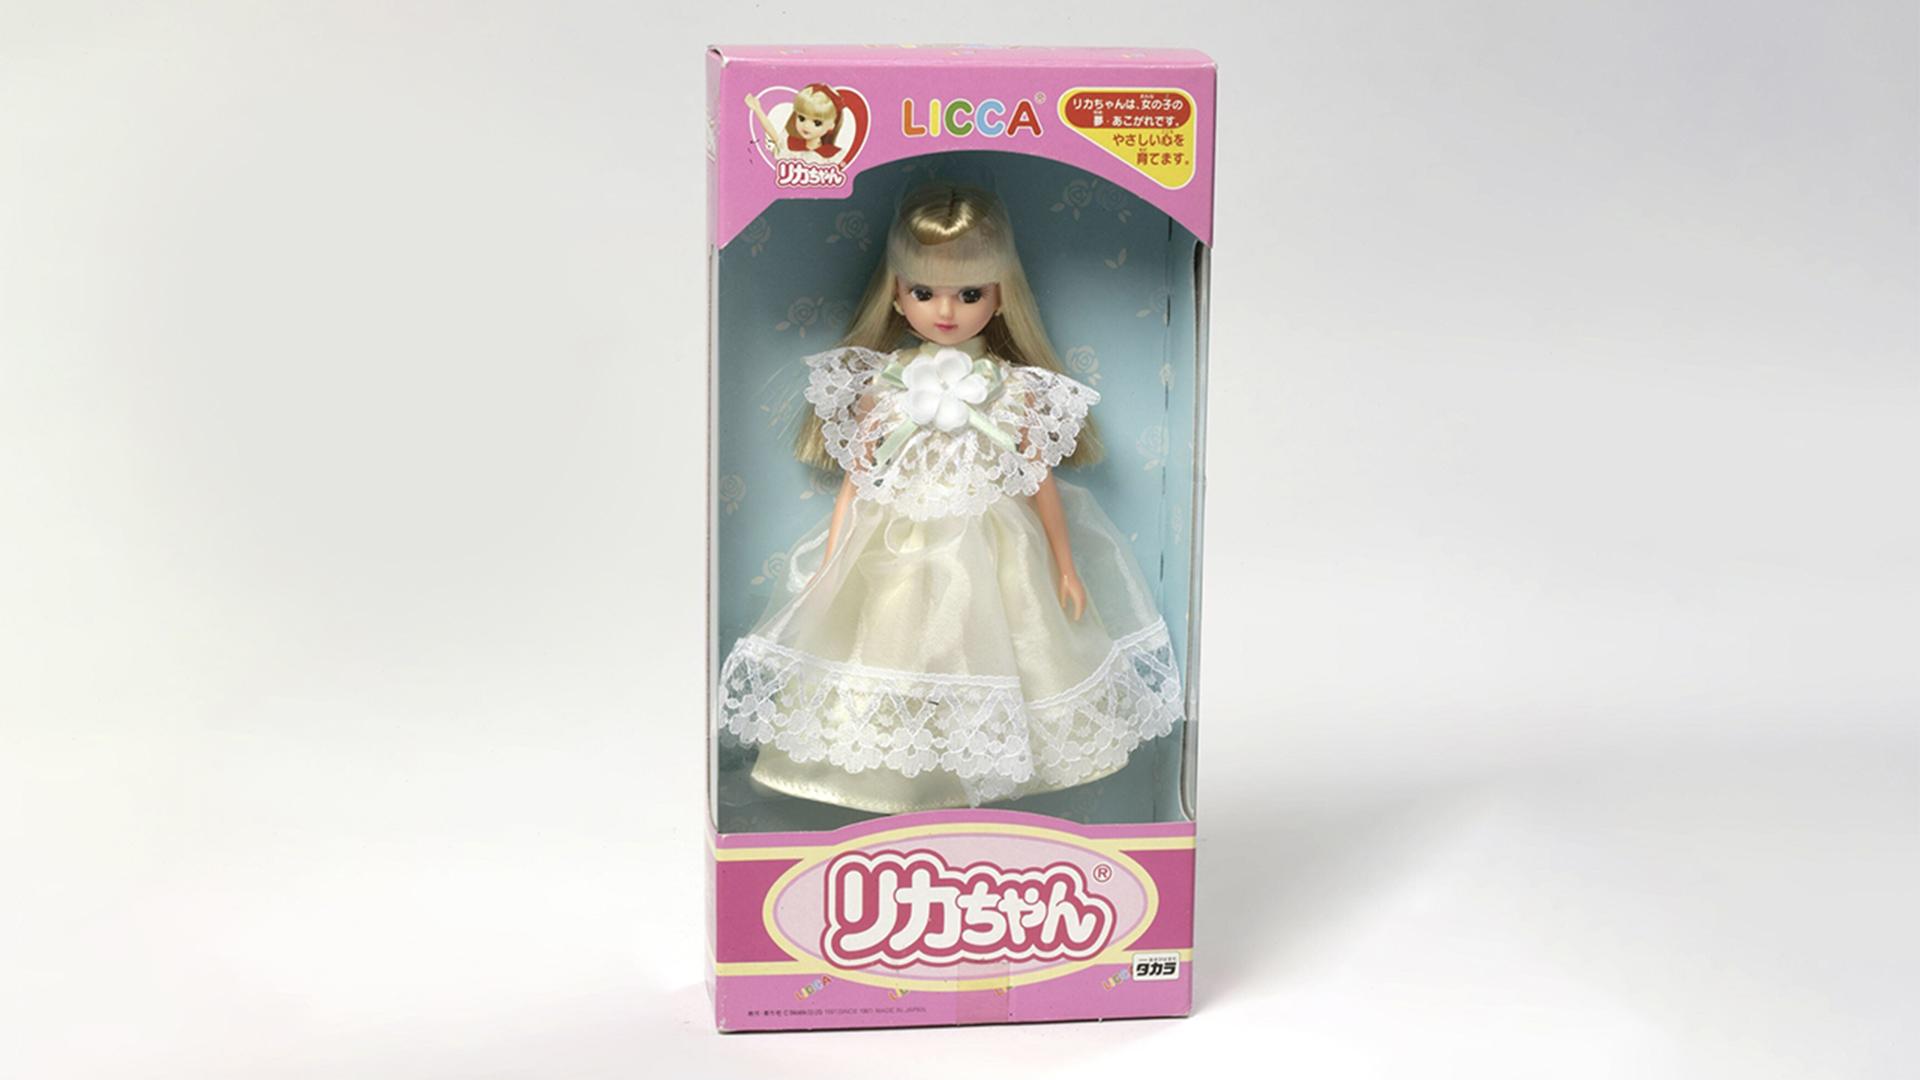 Licca-chan doll in white dress and pink box